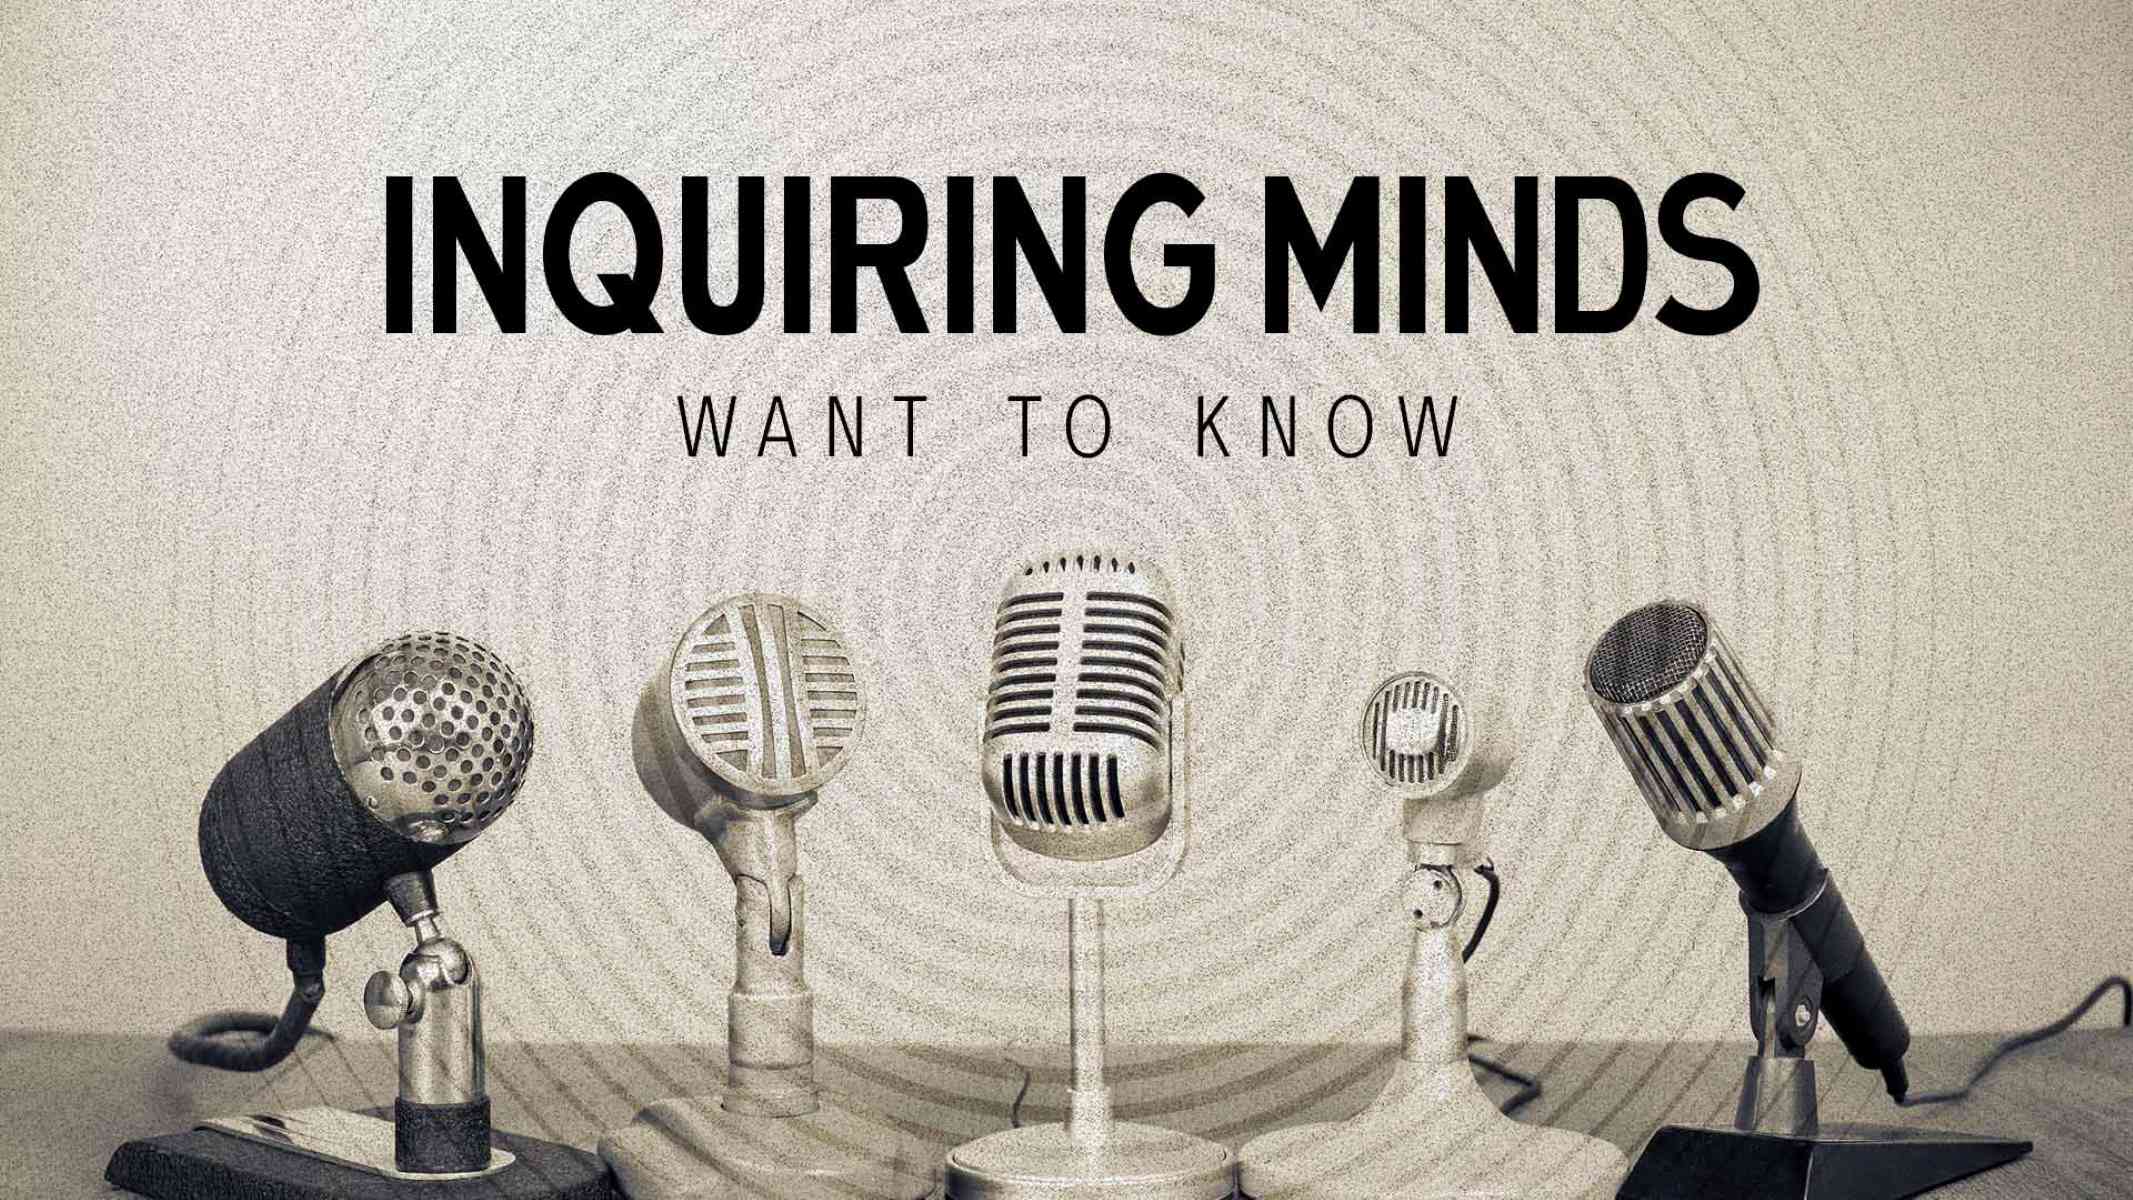 The Surprising Origin Of “Inquiring Minds Want To Know”